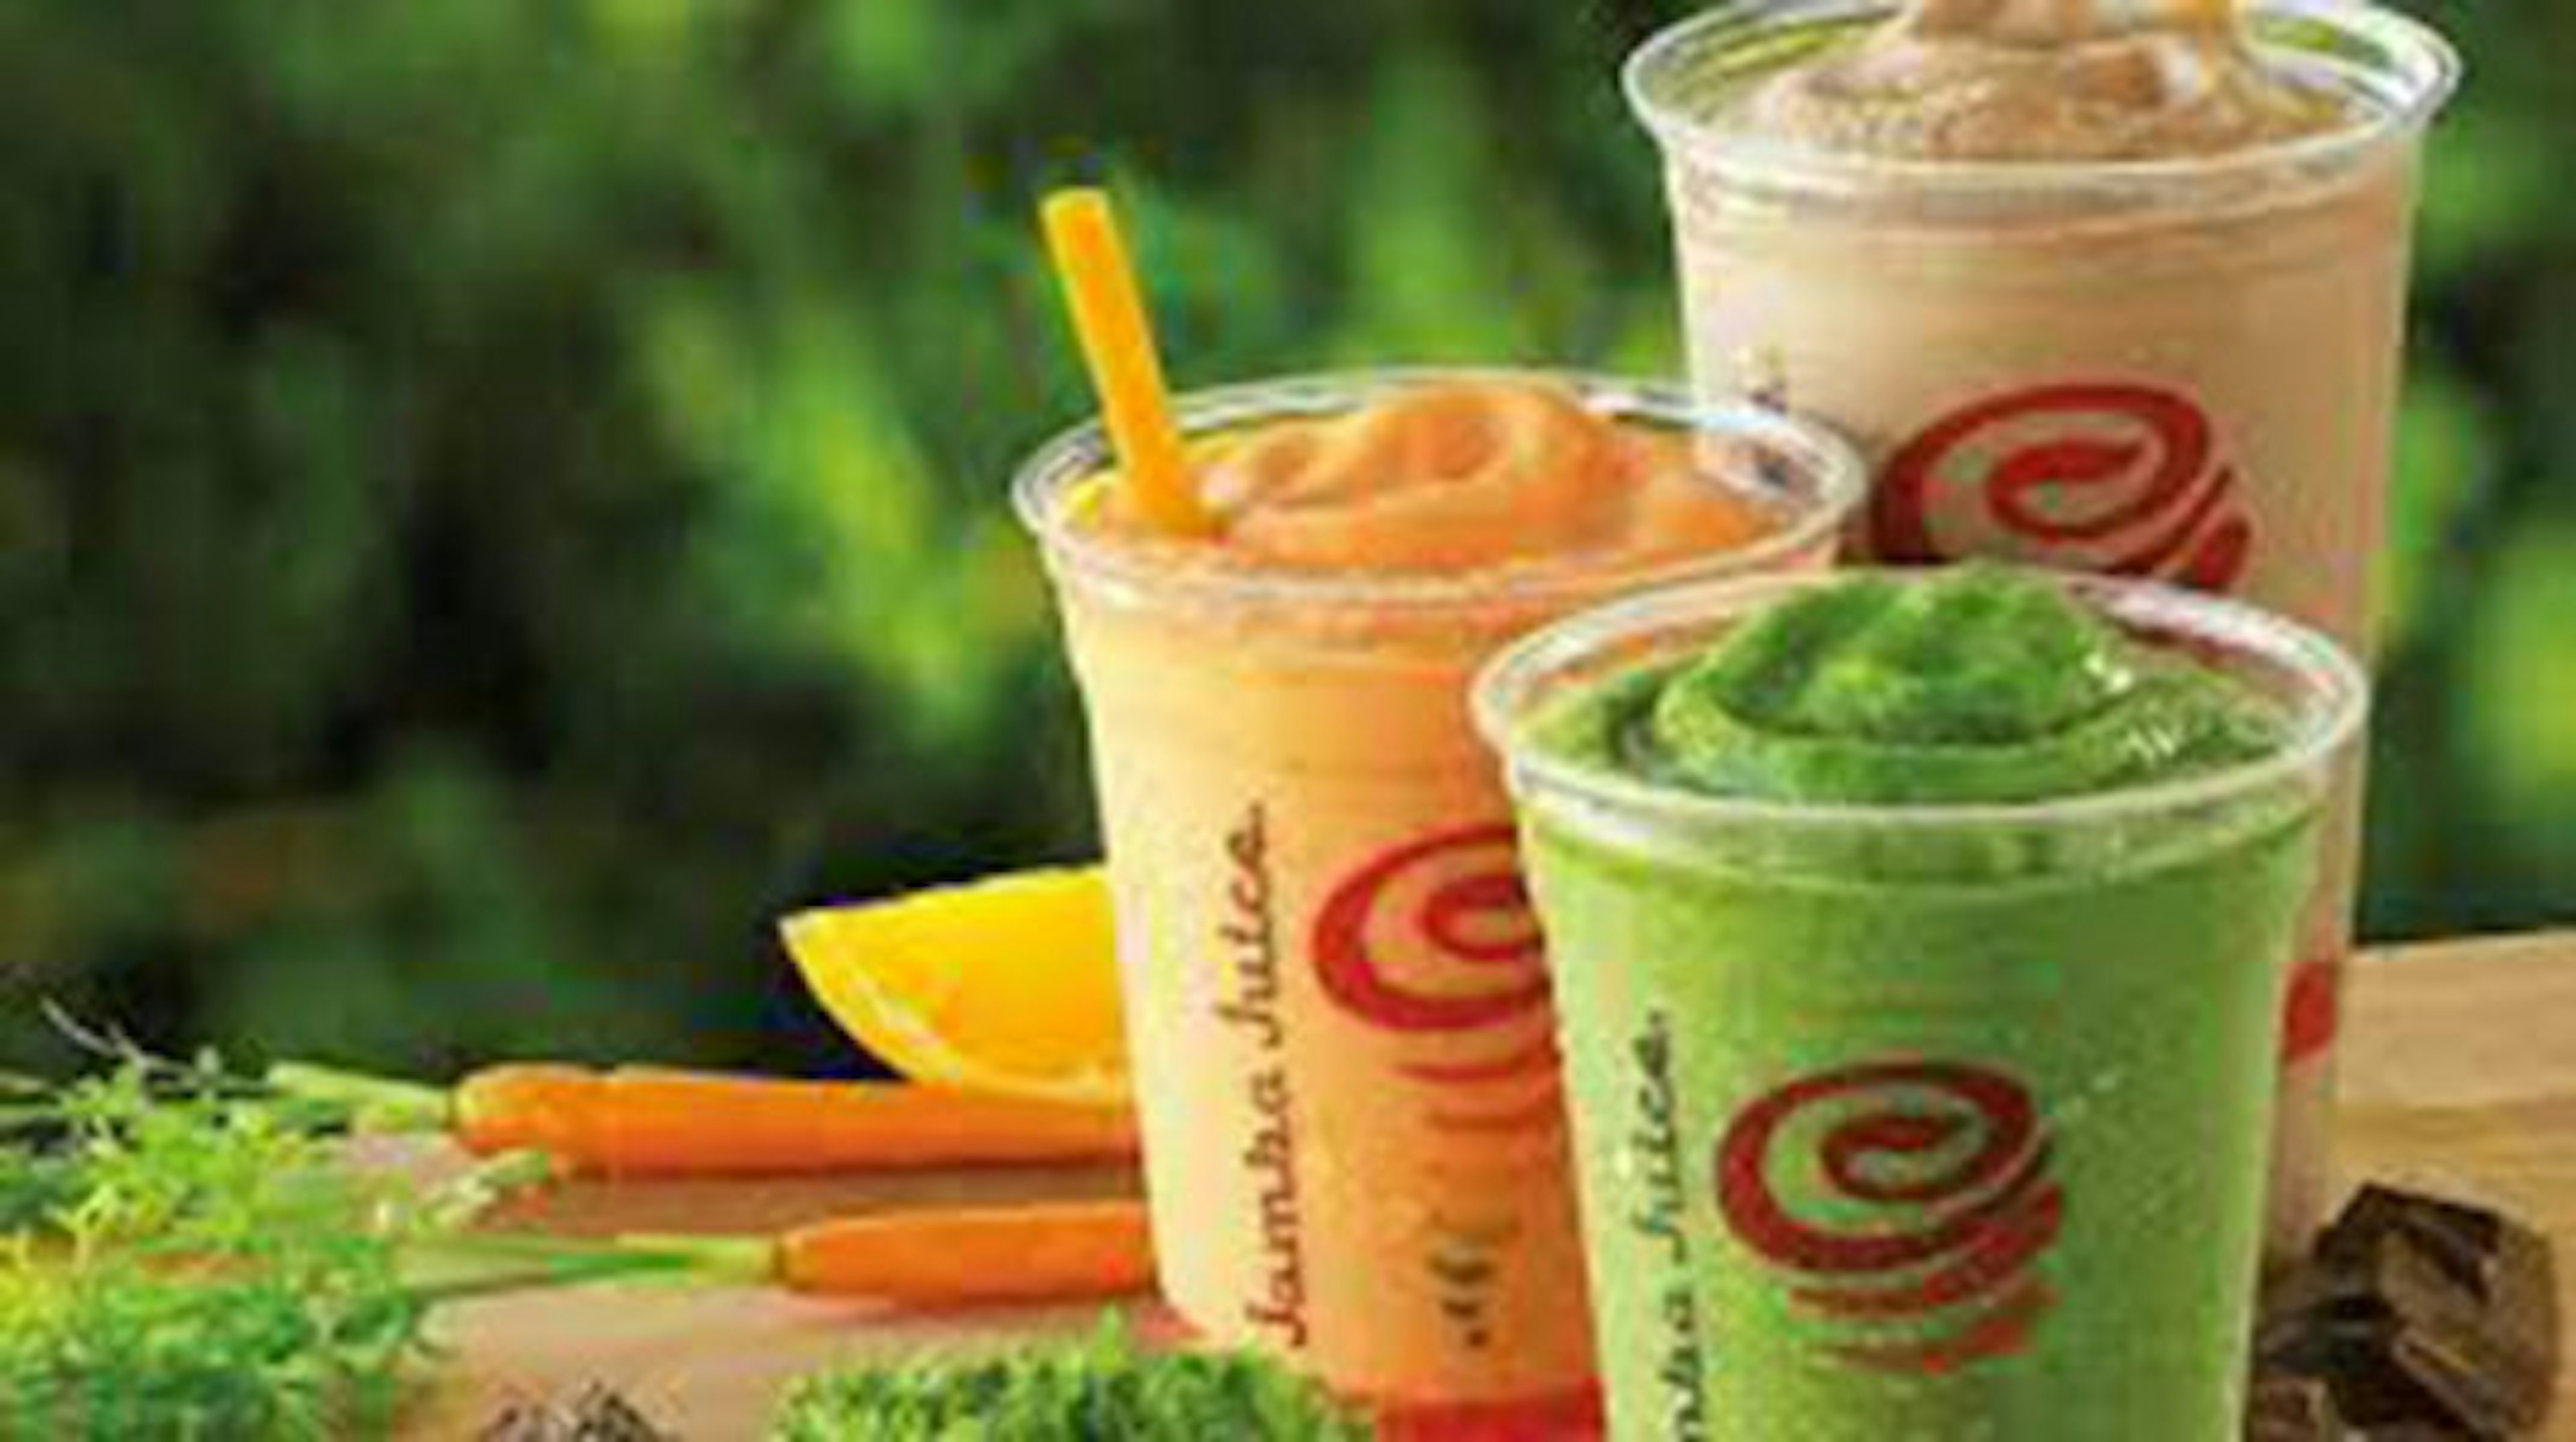 $1 Off Any Large Smoothie or Bowl